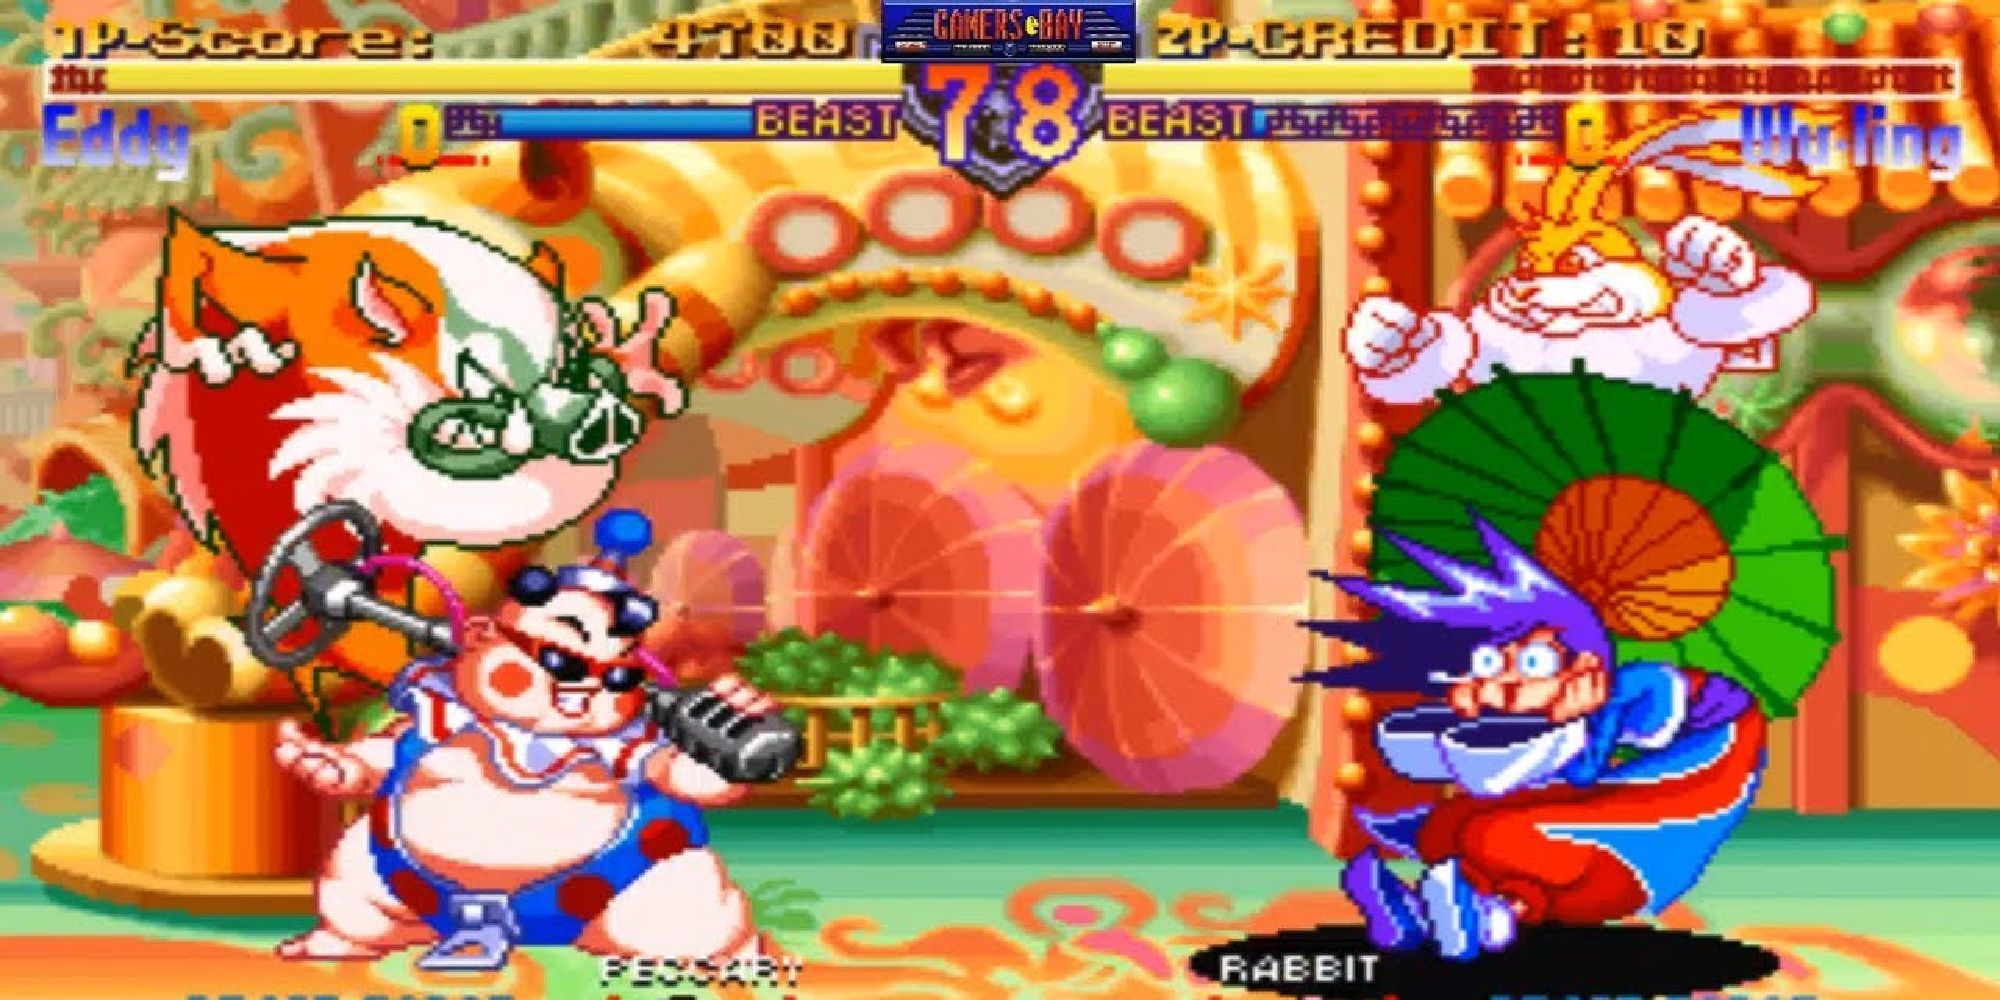 A screenshot of the 1997 arcade fighting game Rabbit, showing two characters squaring off in a colorful arena